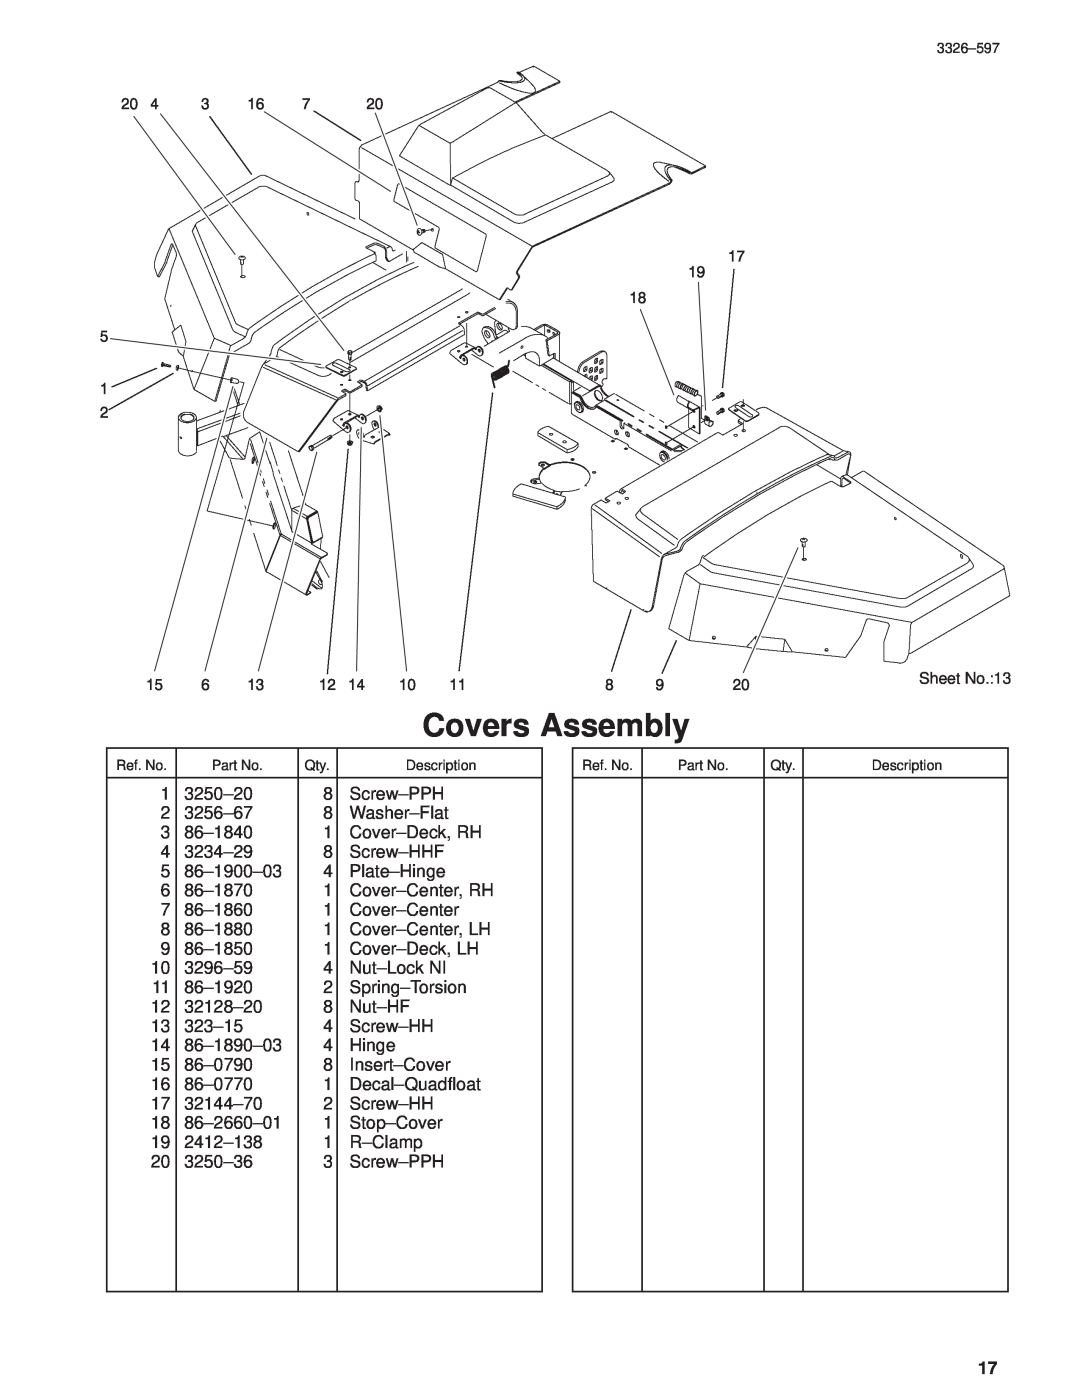 Toro 30402210000001 and Up manual Covers Assembly 